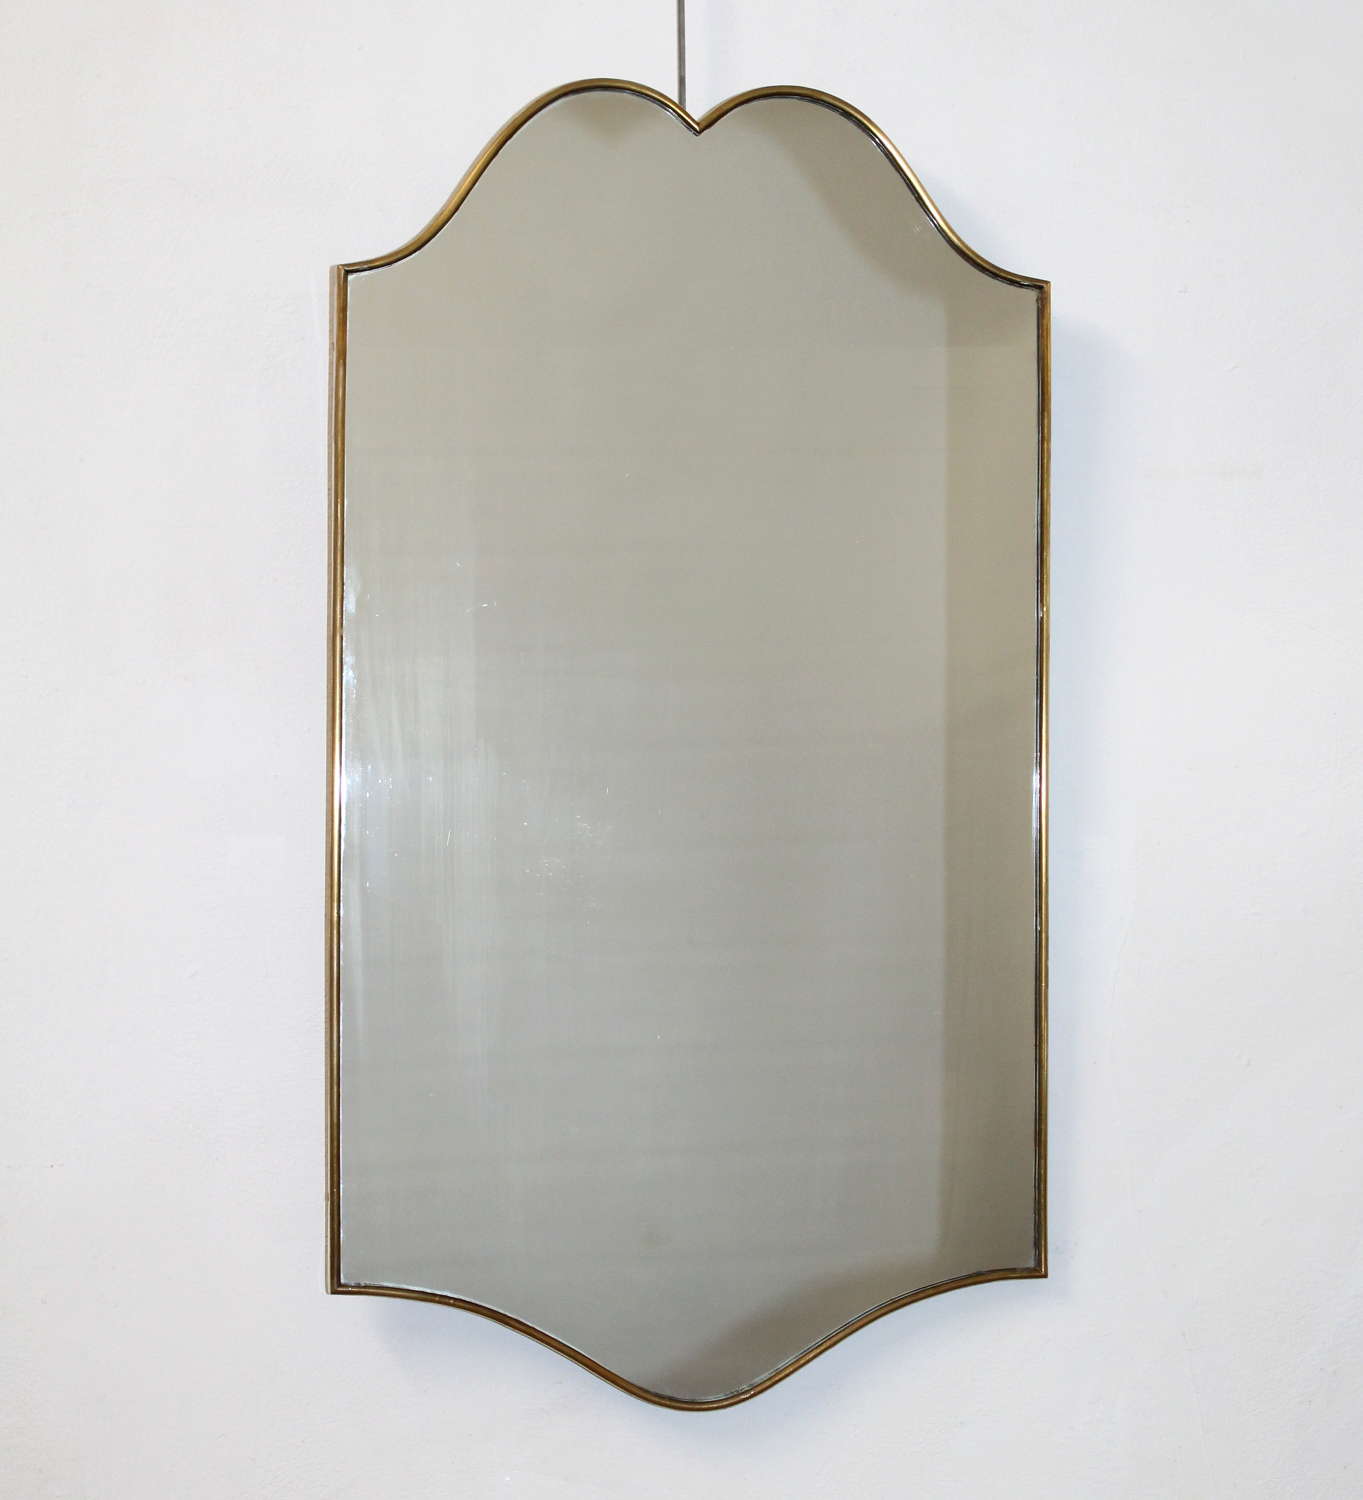 Mid-century modern Italian mirror with double curved top